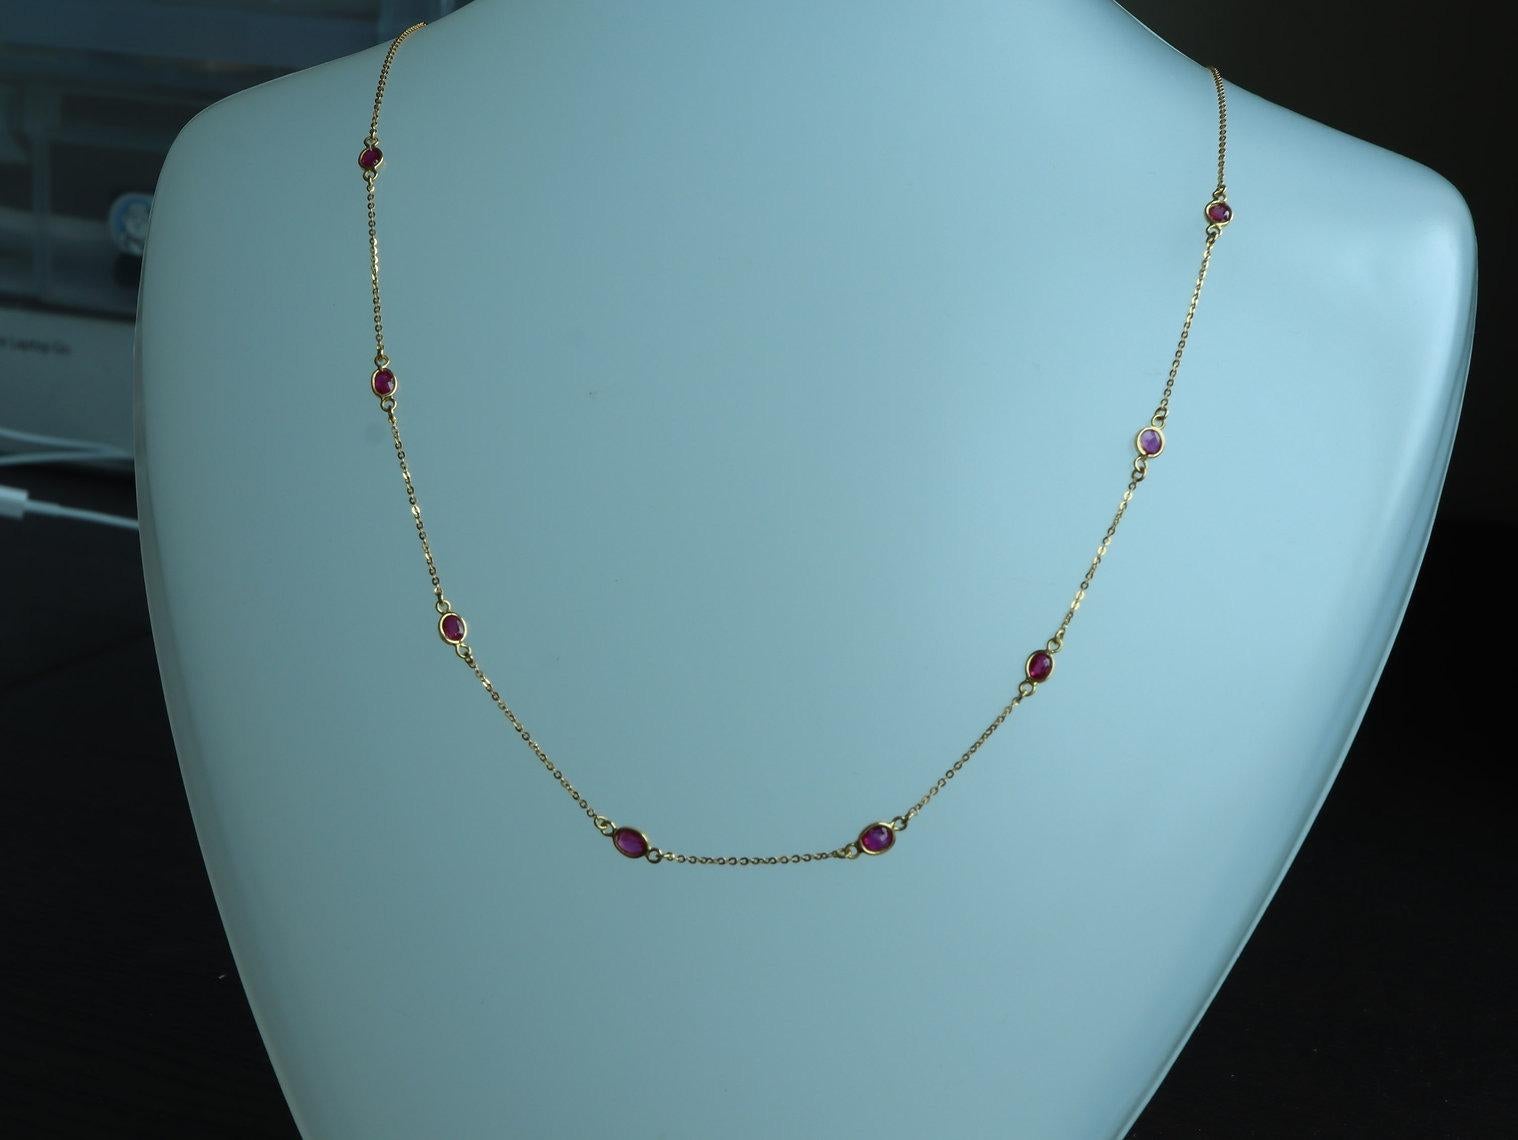 
This simple minimalist design includes 8 Unheated Burma Ruby that float around the neck on a dainty chain. Most importantly, every single stone is an earth-mined natural ruby from Mogok, Burma, free from heat treatment or any enhancement. Length